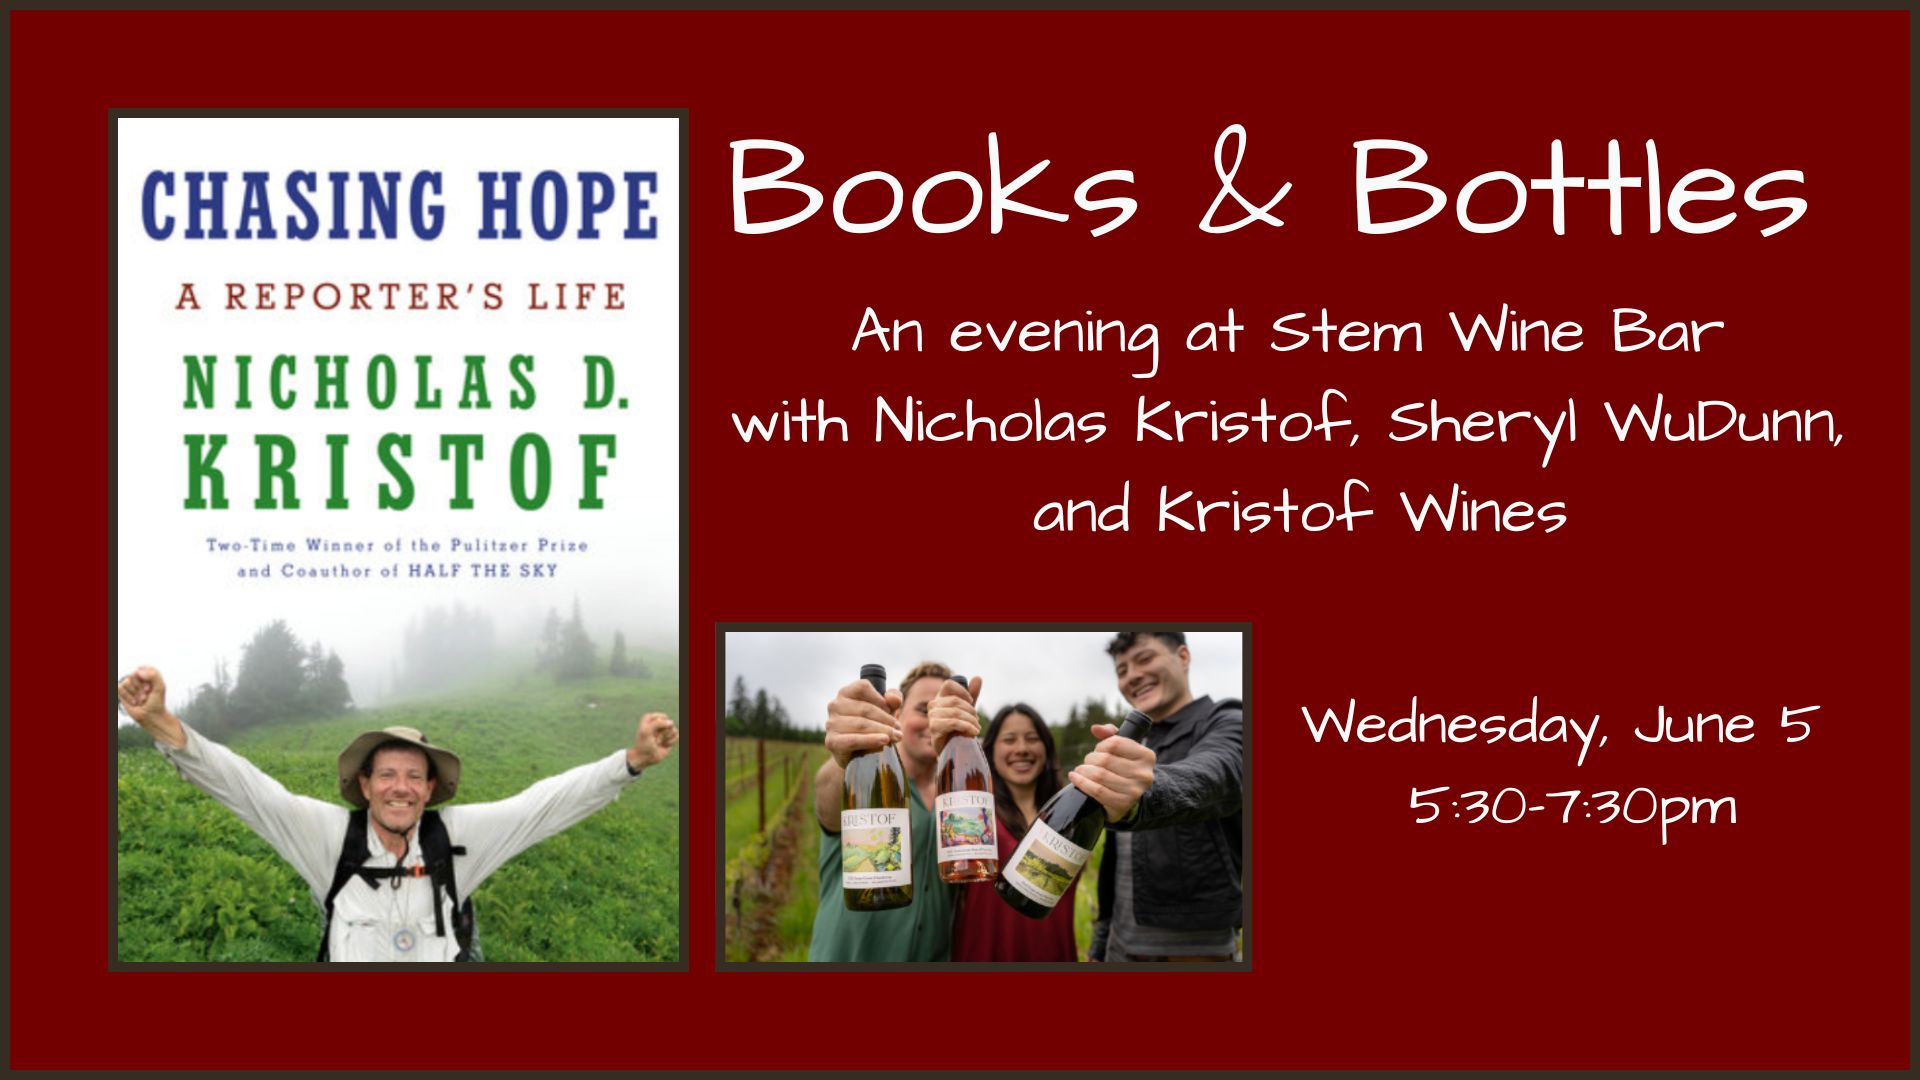 Books & Bottles: An evening at Stem Wine Bar with Kristof Wines